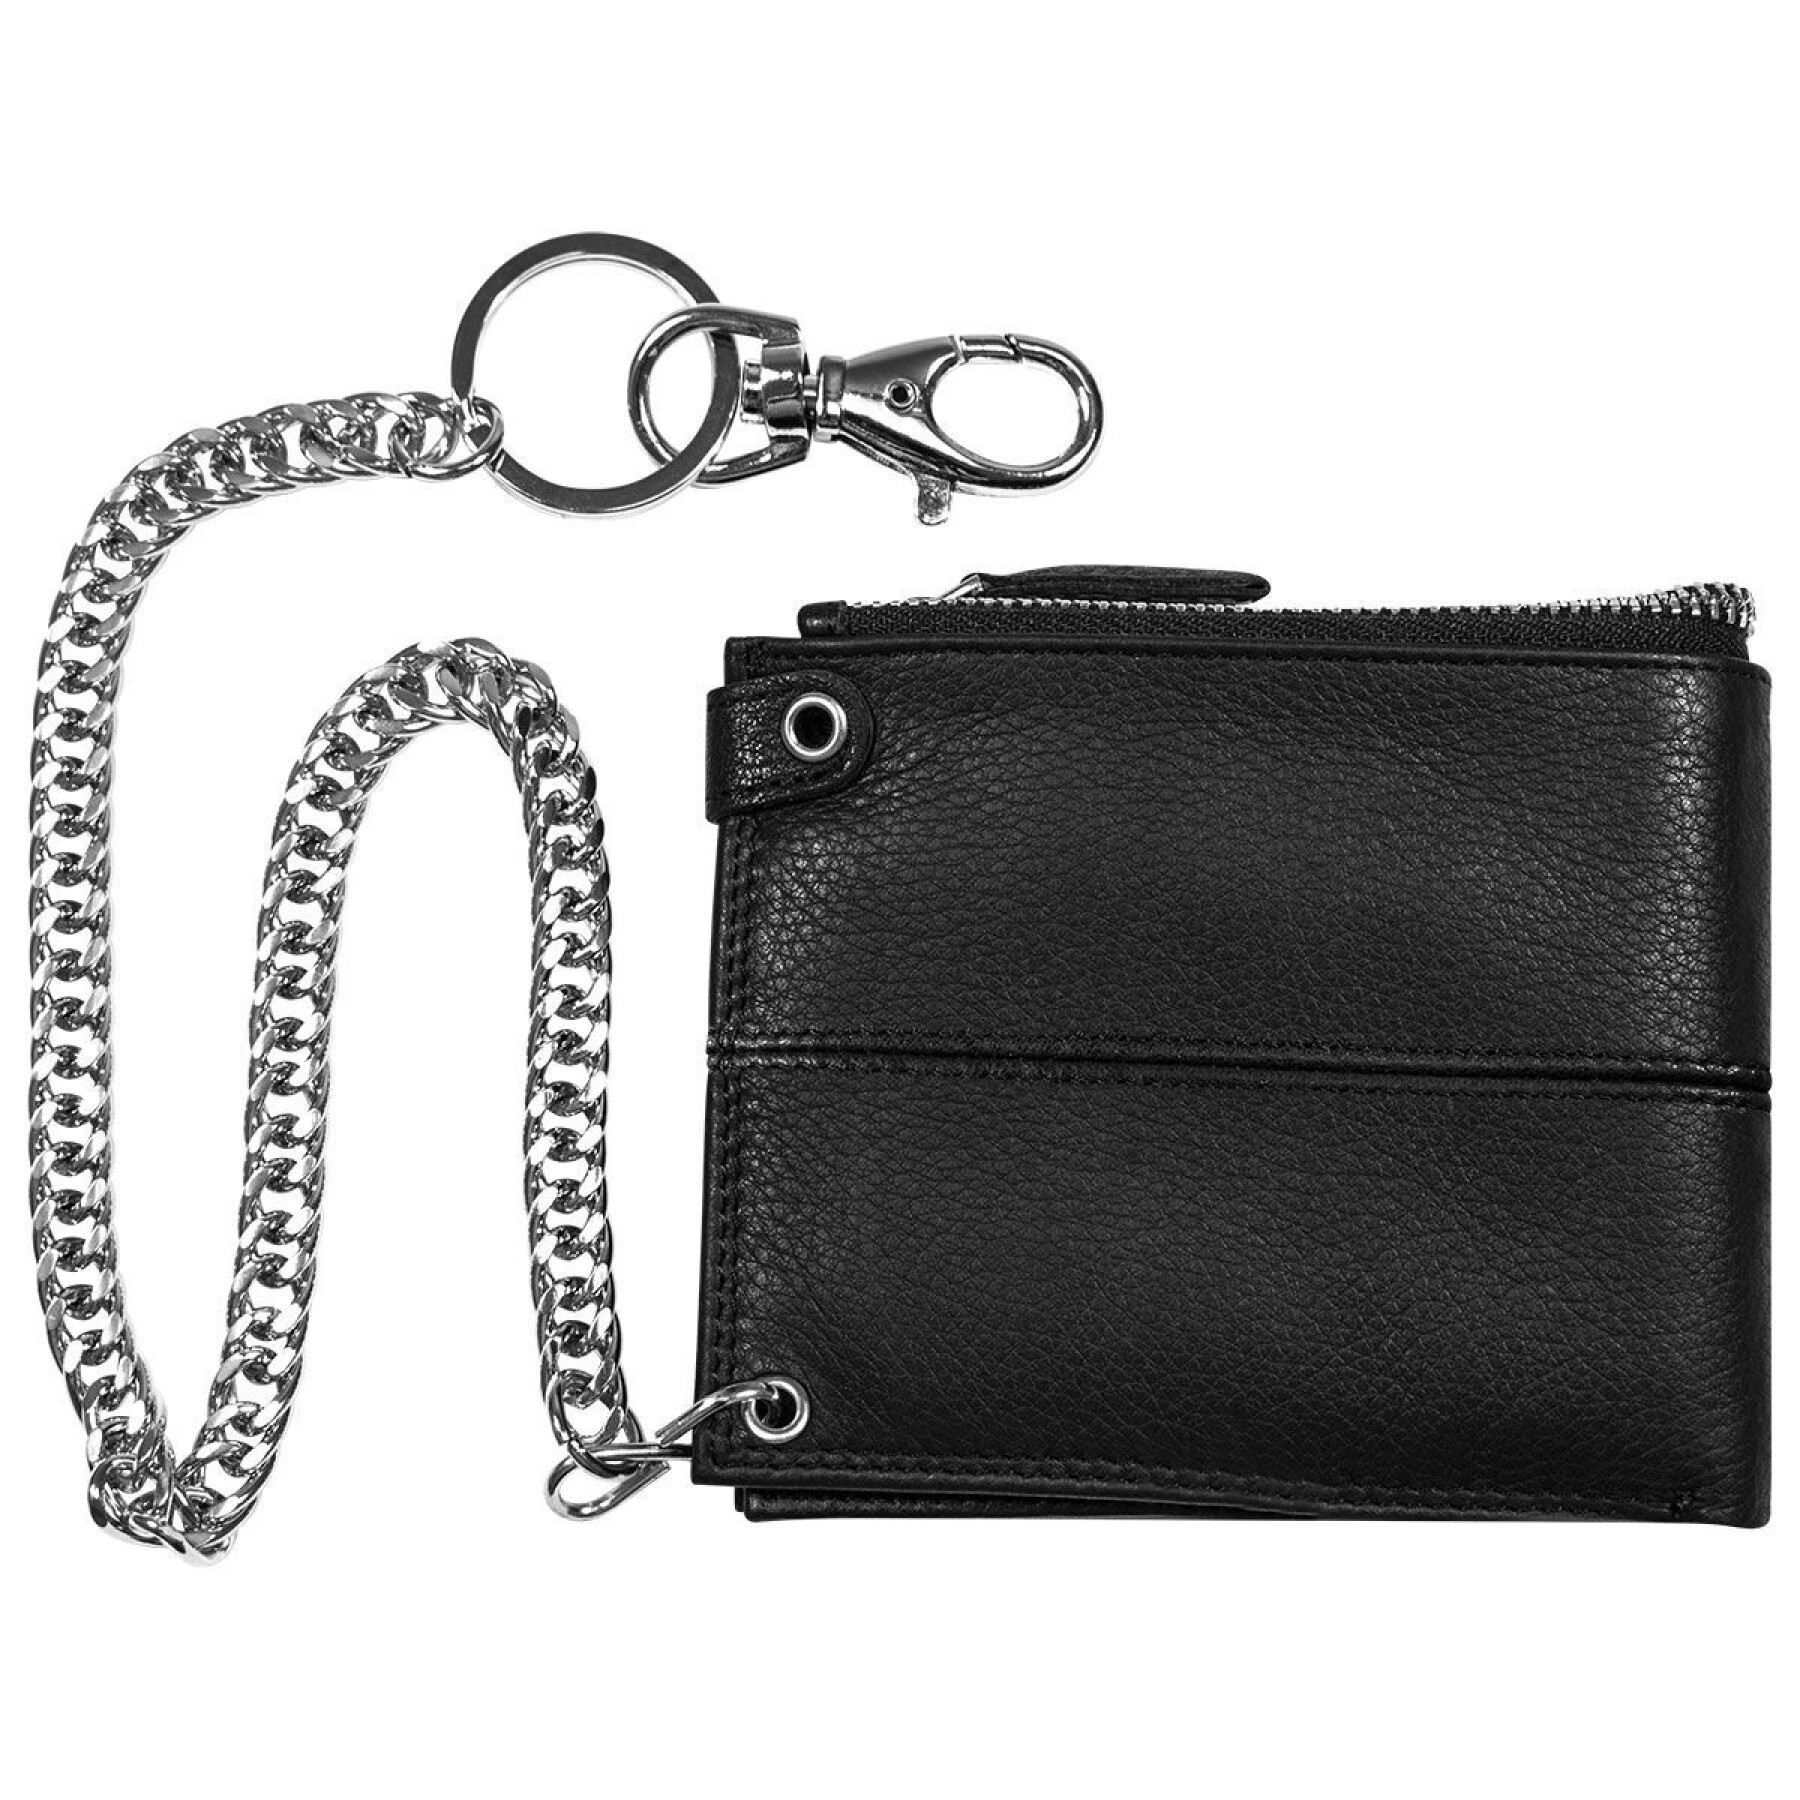 Zipped leather chain wallet Rock à Gogo